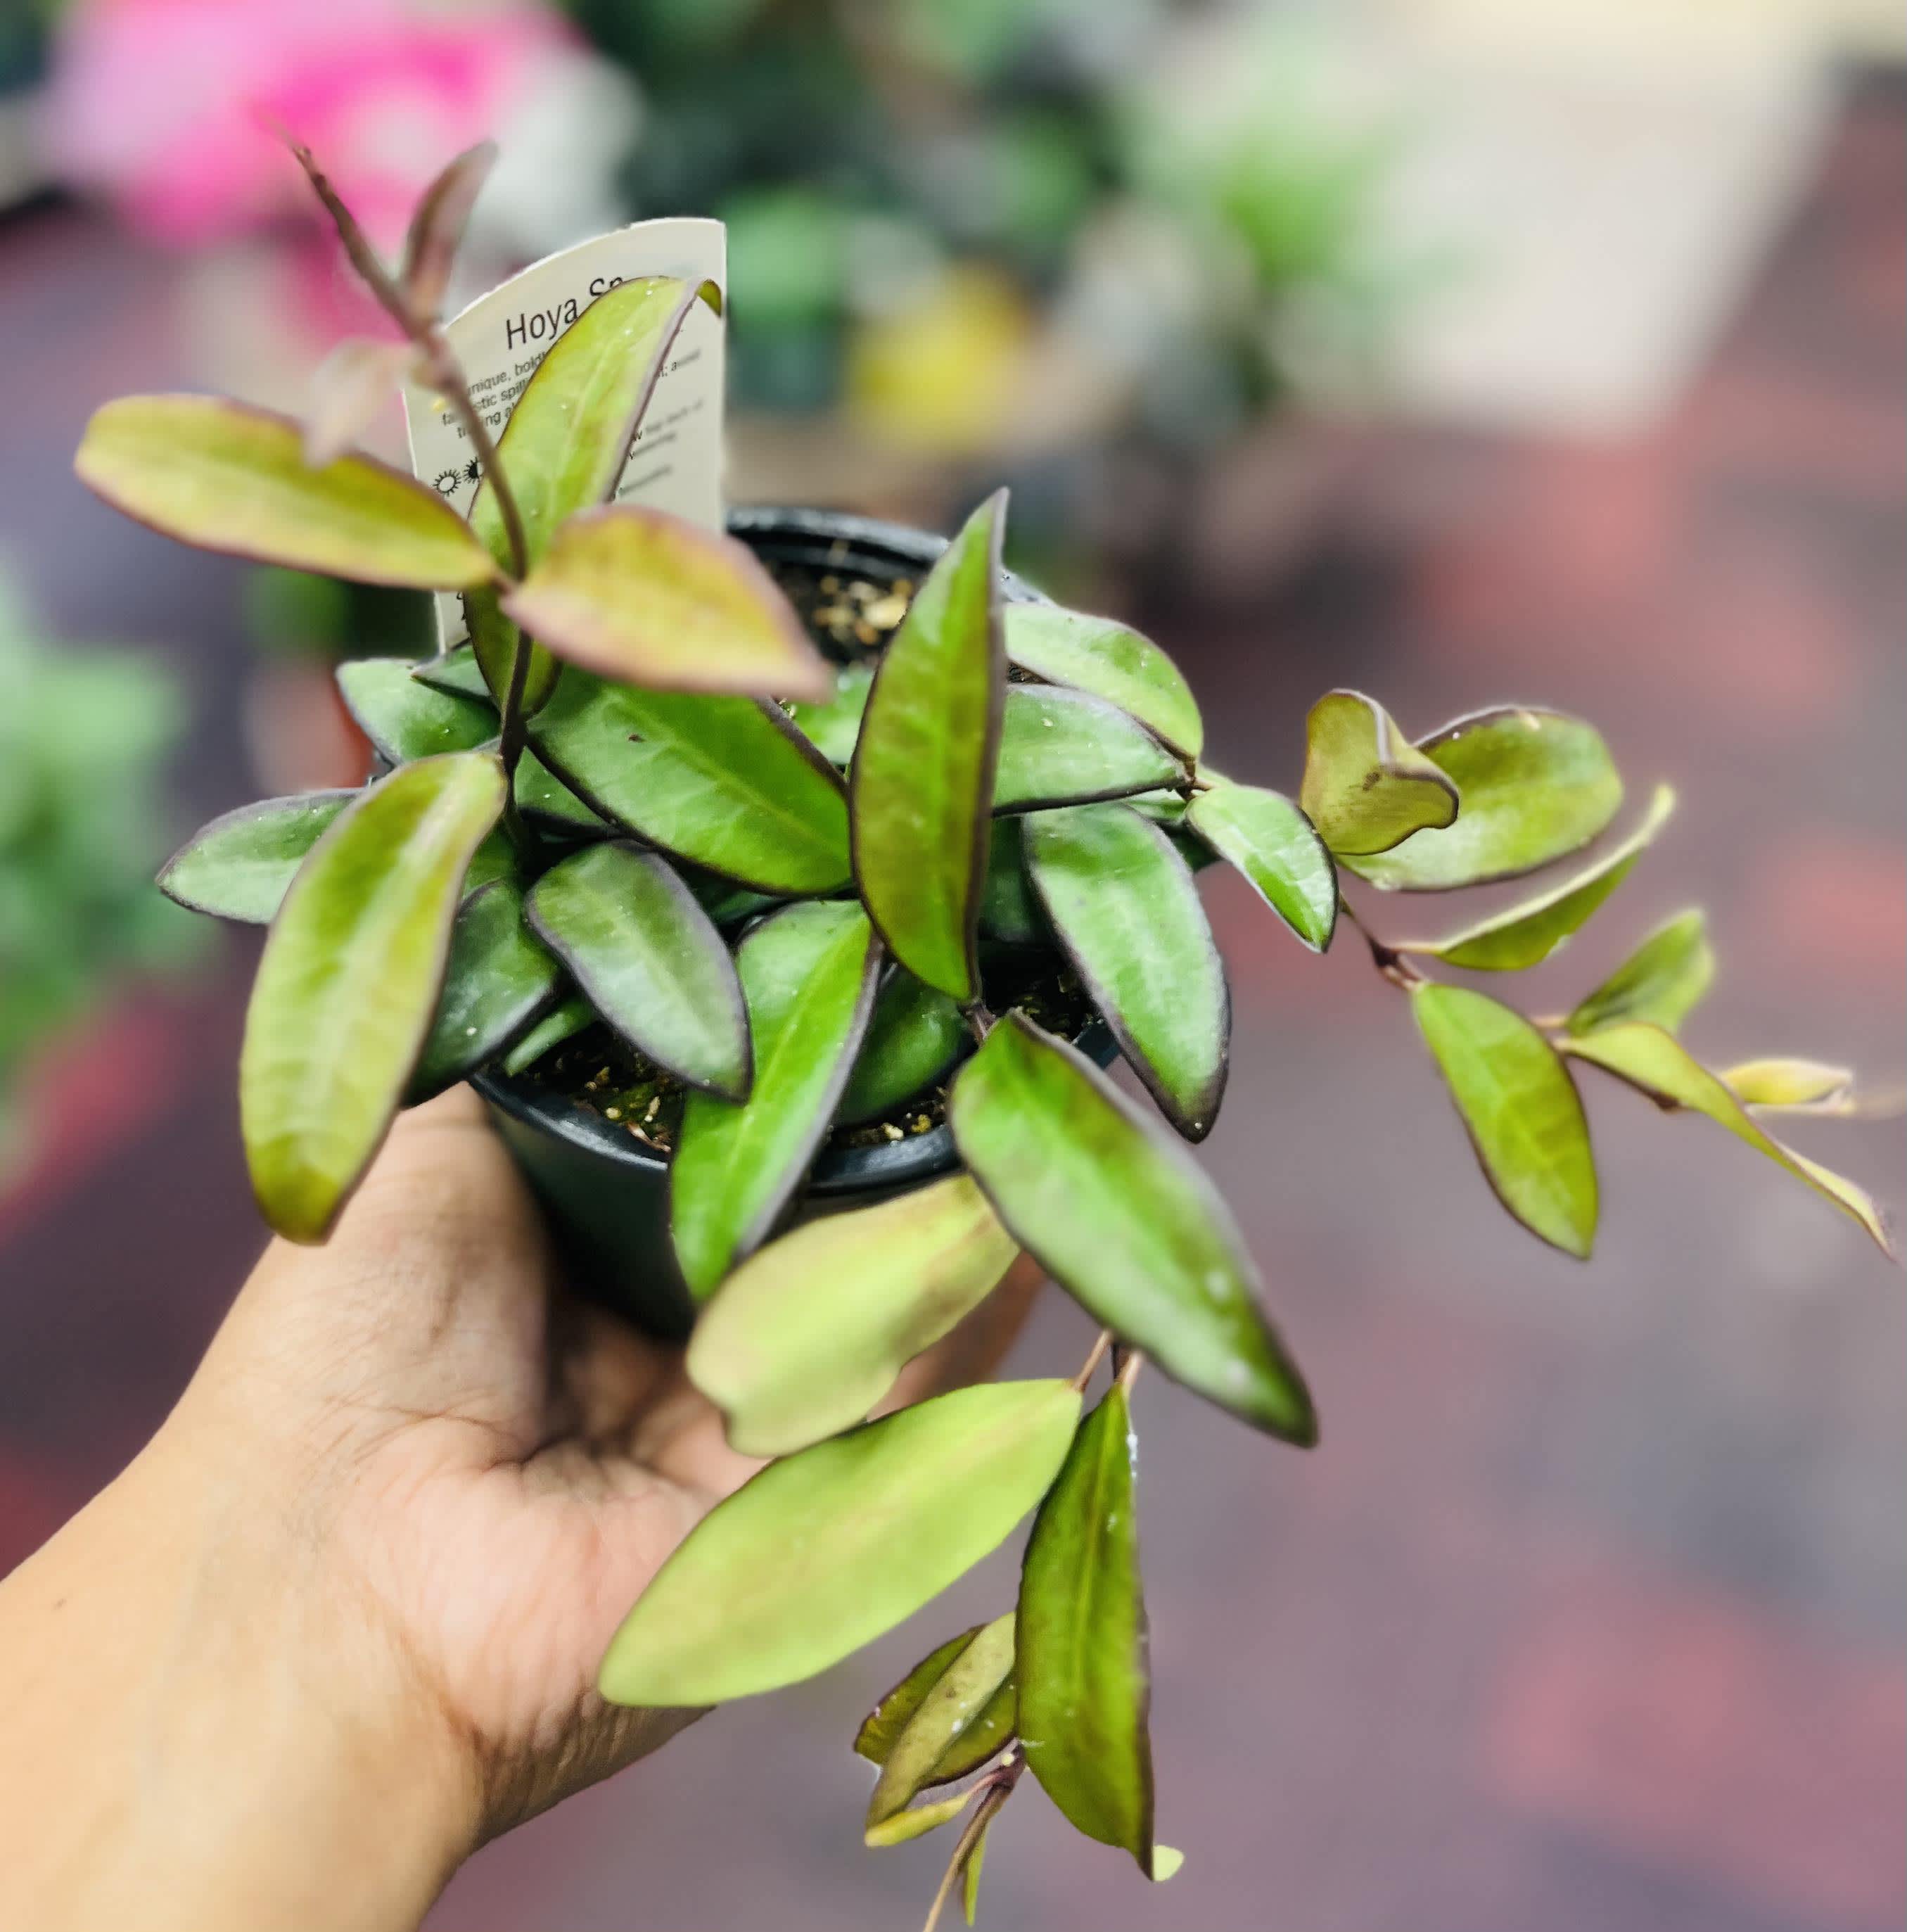 Hoya Rosita - Most popular, Rare and easy care plants for all, prefer humidity and well diluted liquid fertilizer.  Light: Bright Indirect Water: Drought tolerant, water when the soil feels dried out. Pet Friendly: Yes.   